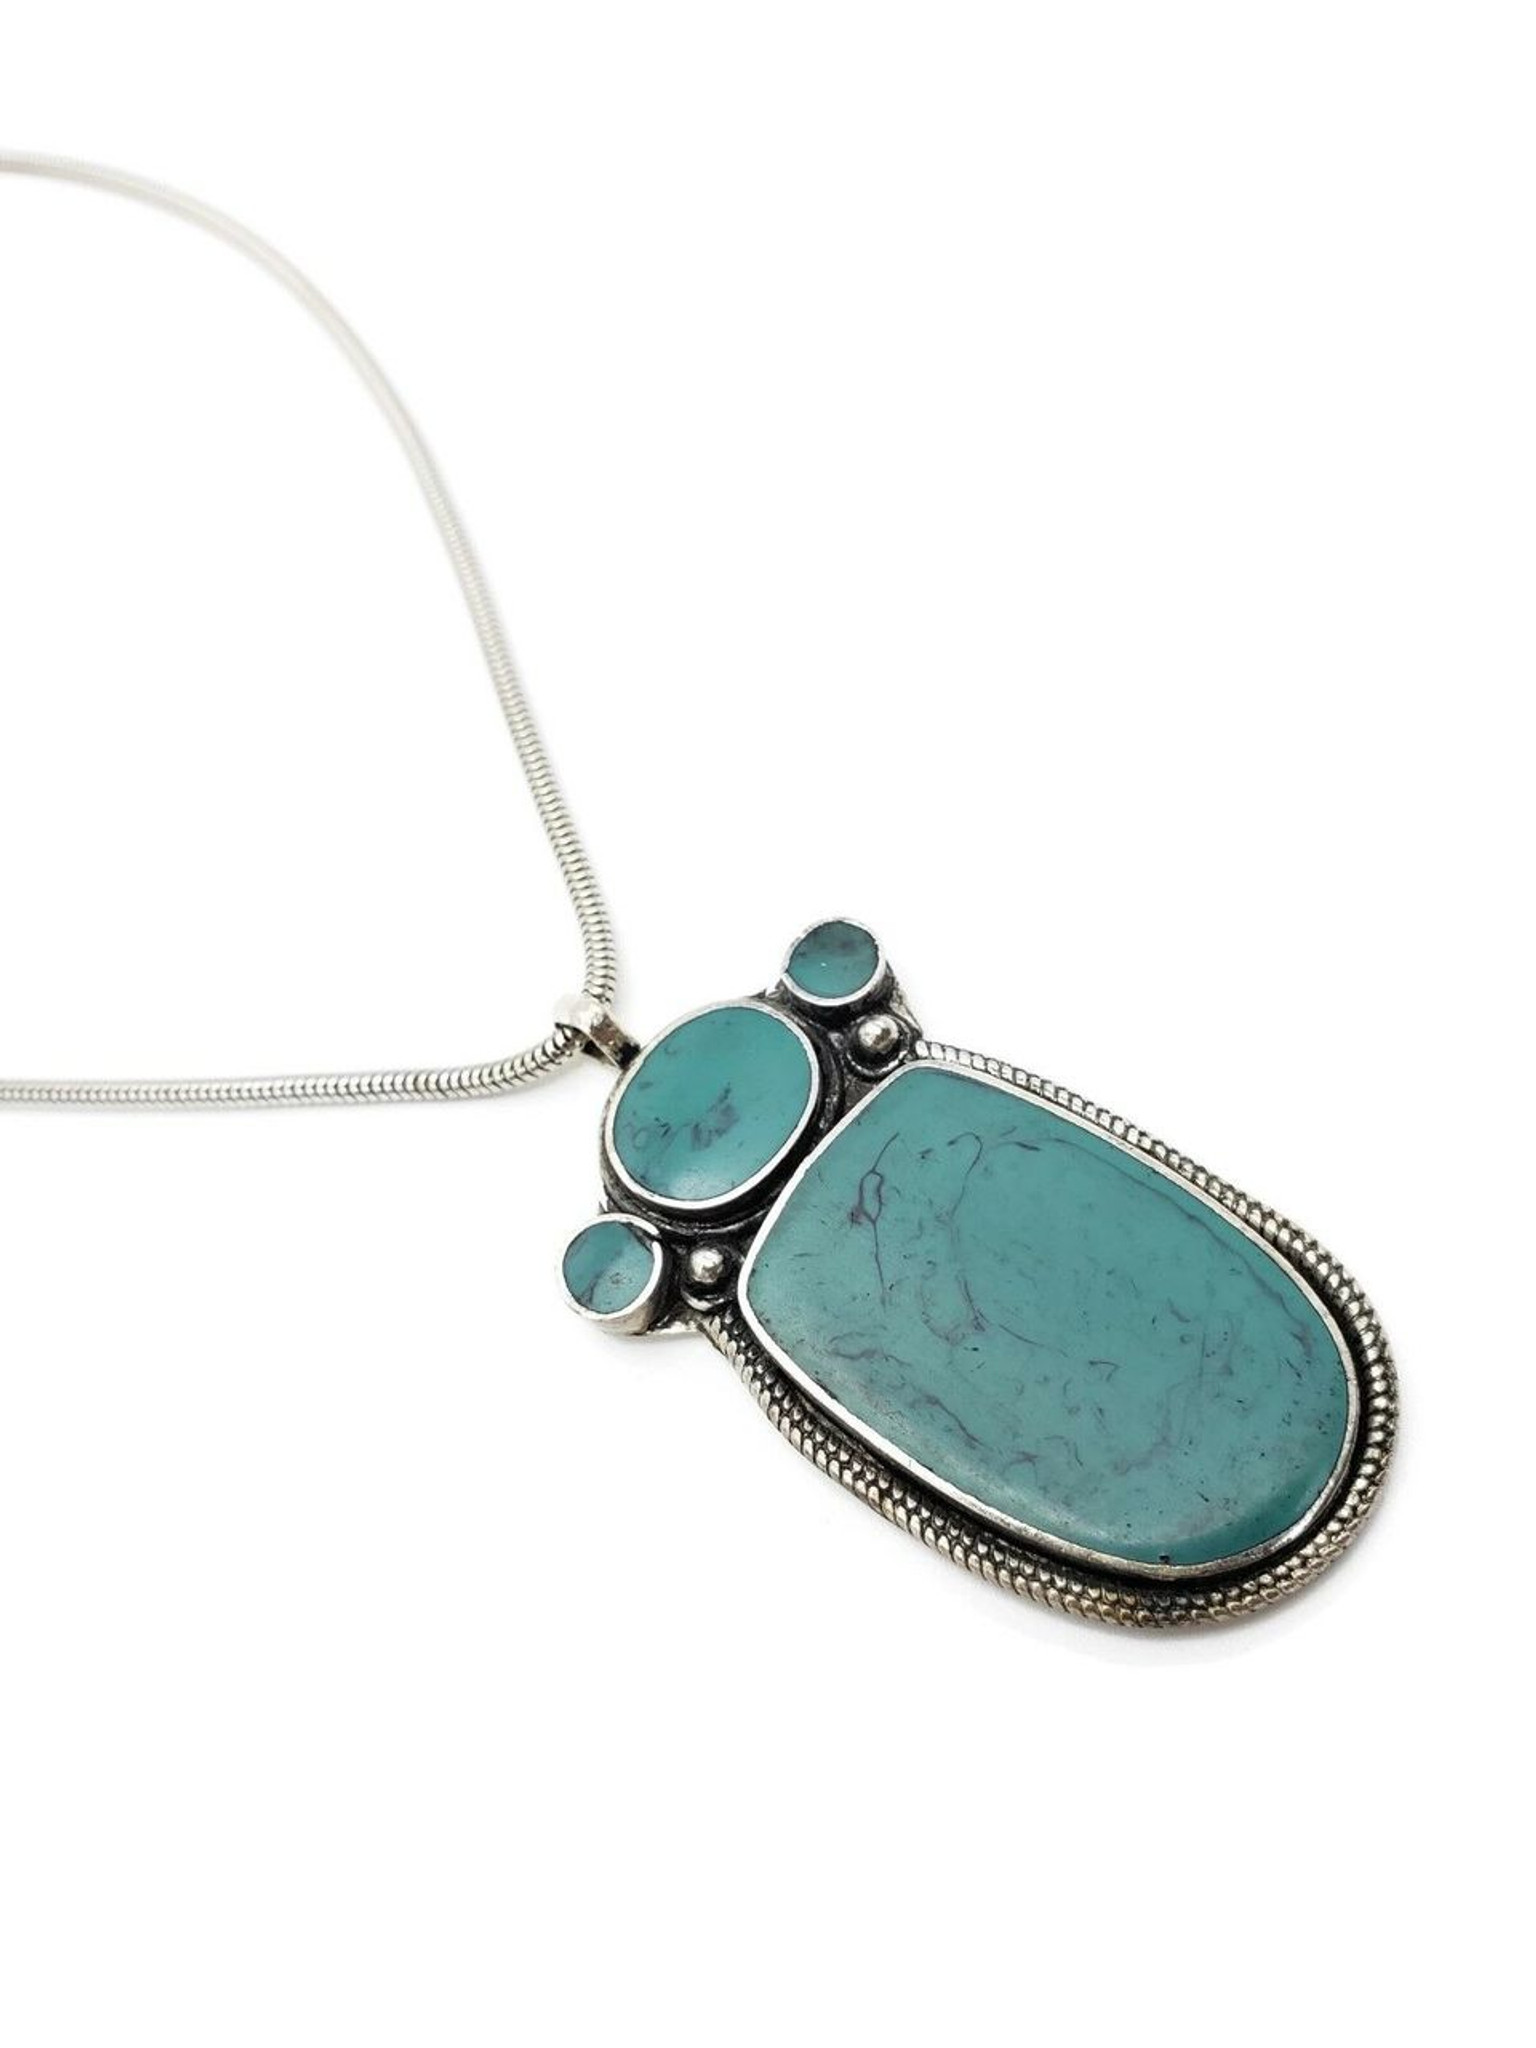 Zalika Classic Silver Plated Necklace with Resin Turquoise Pendant 